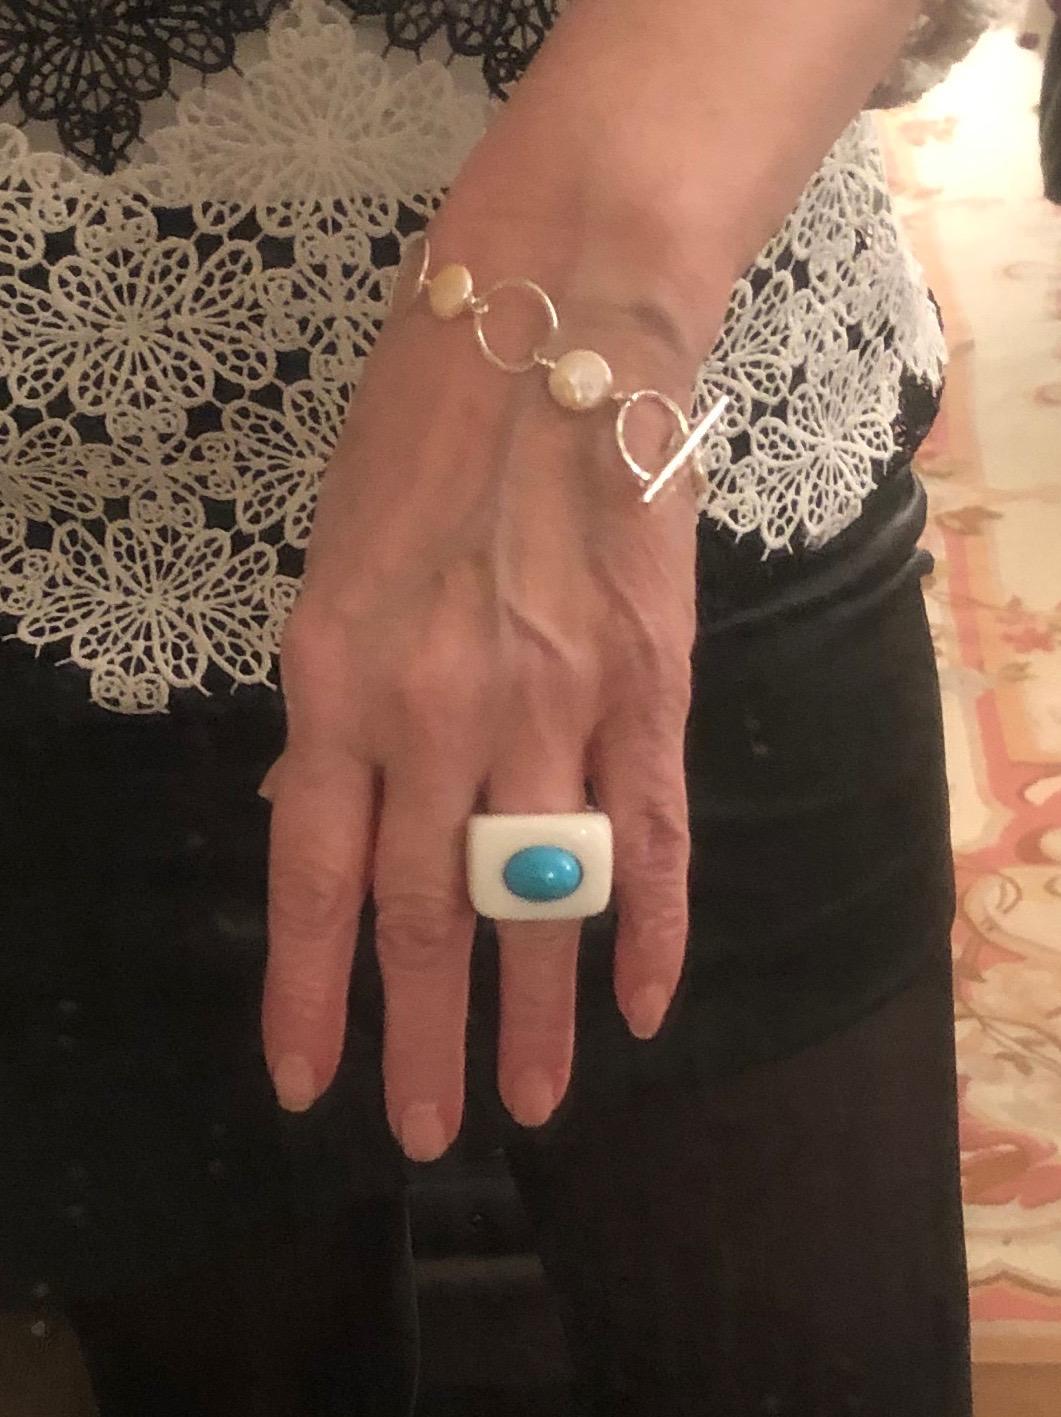 Blue Chalcedony Art Deco Ring with Turquoise Stone set in Sterling Silver.
Chalcedony is a member of the Quartz family. Its name may be derived from the Greek port city of Chalcedon. The ancient civilizations of Egypt, Greece and Rome used varieties